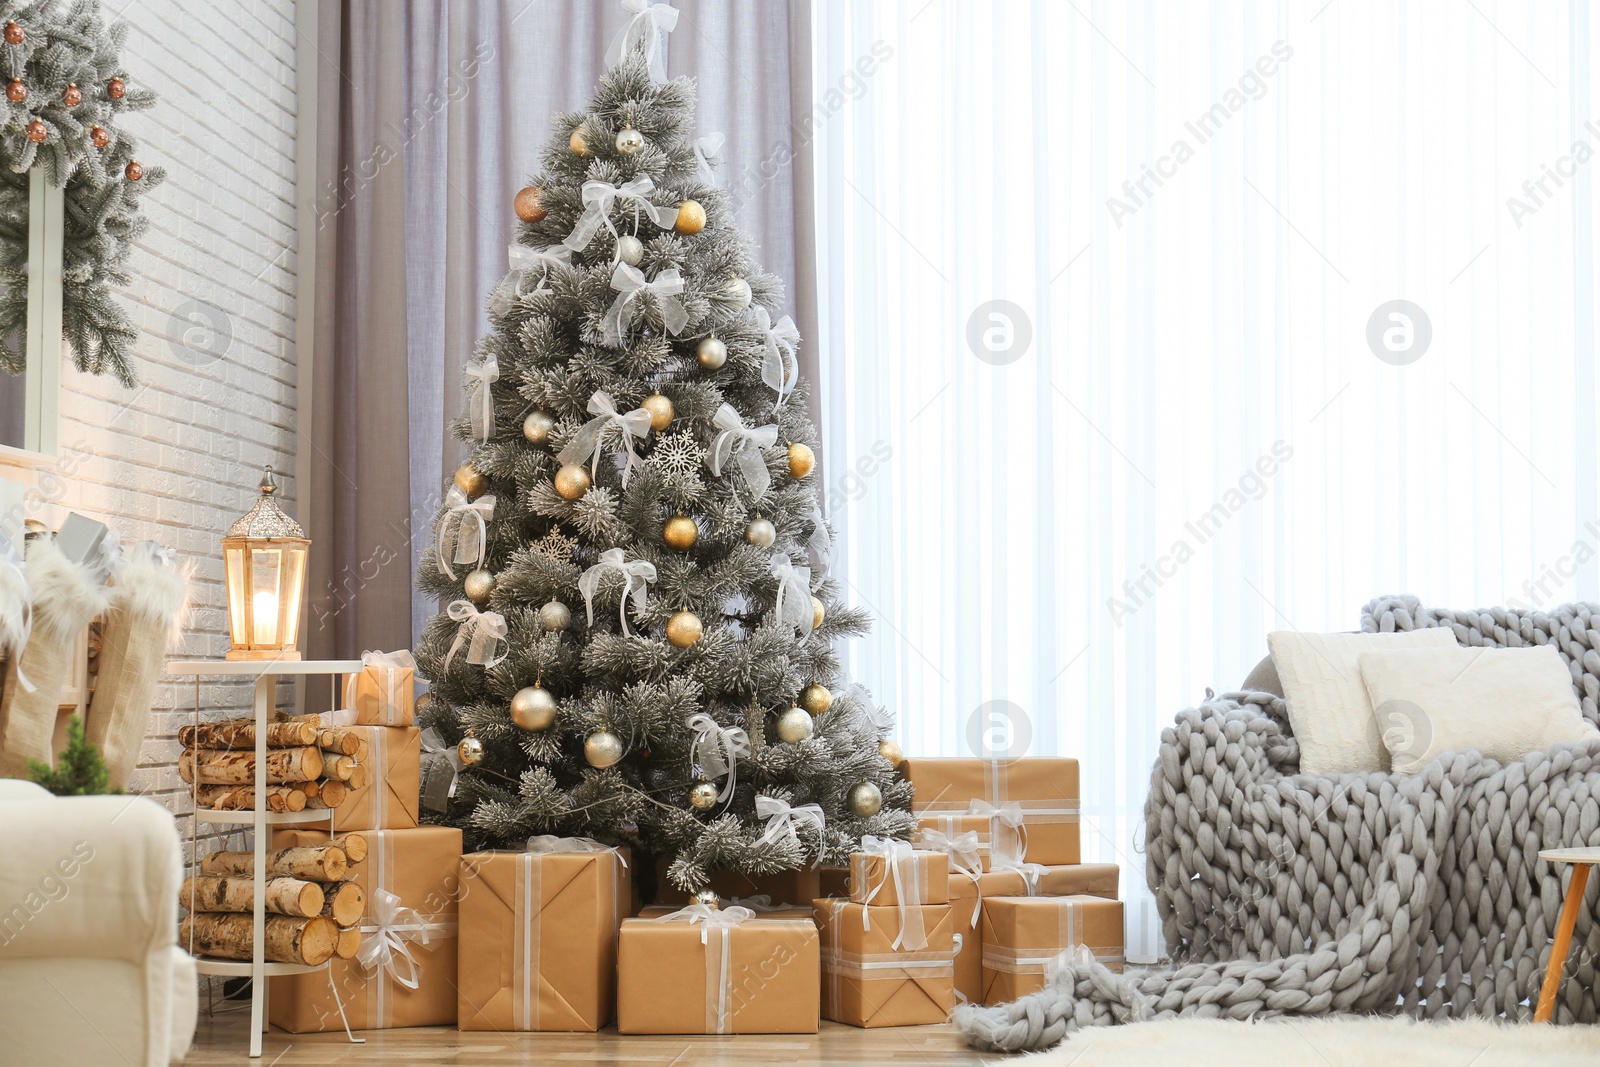 Photo of Room interior with decorated Christmas tree and gifts near window